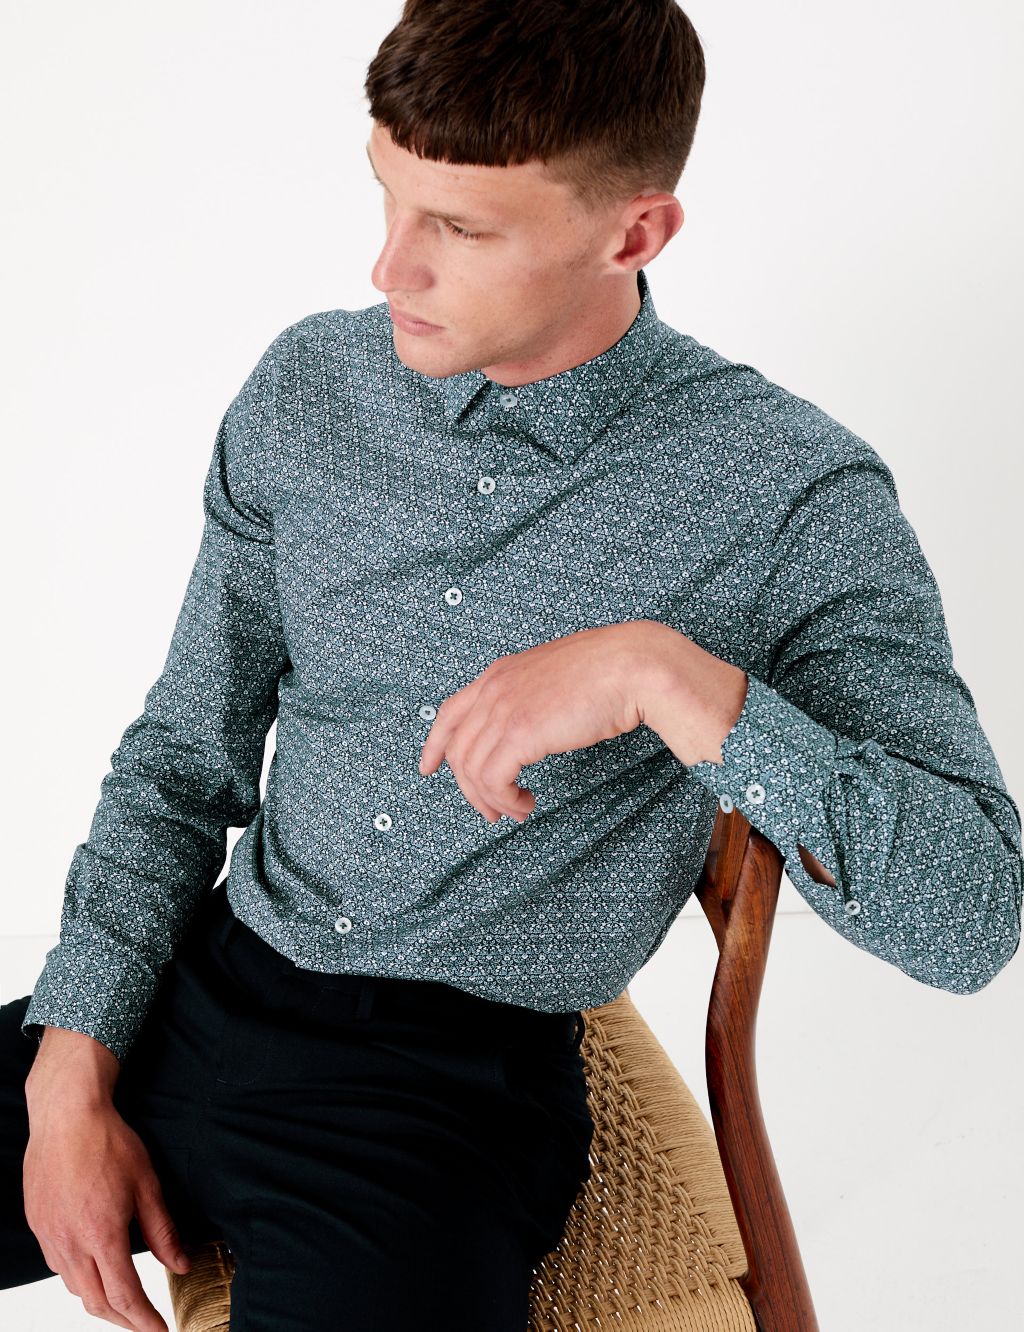 Tailored Fit William Morris Print Shirts 2 of 4